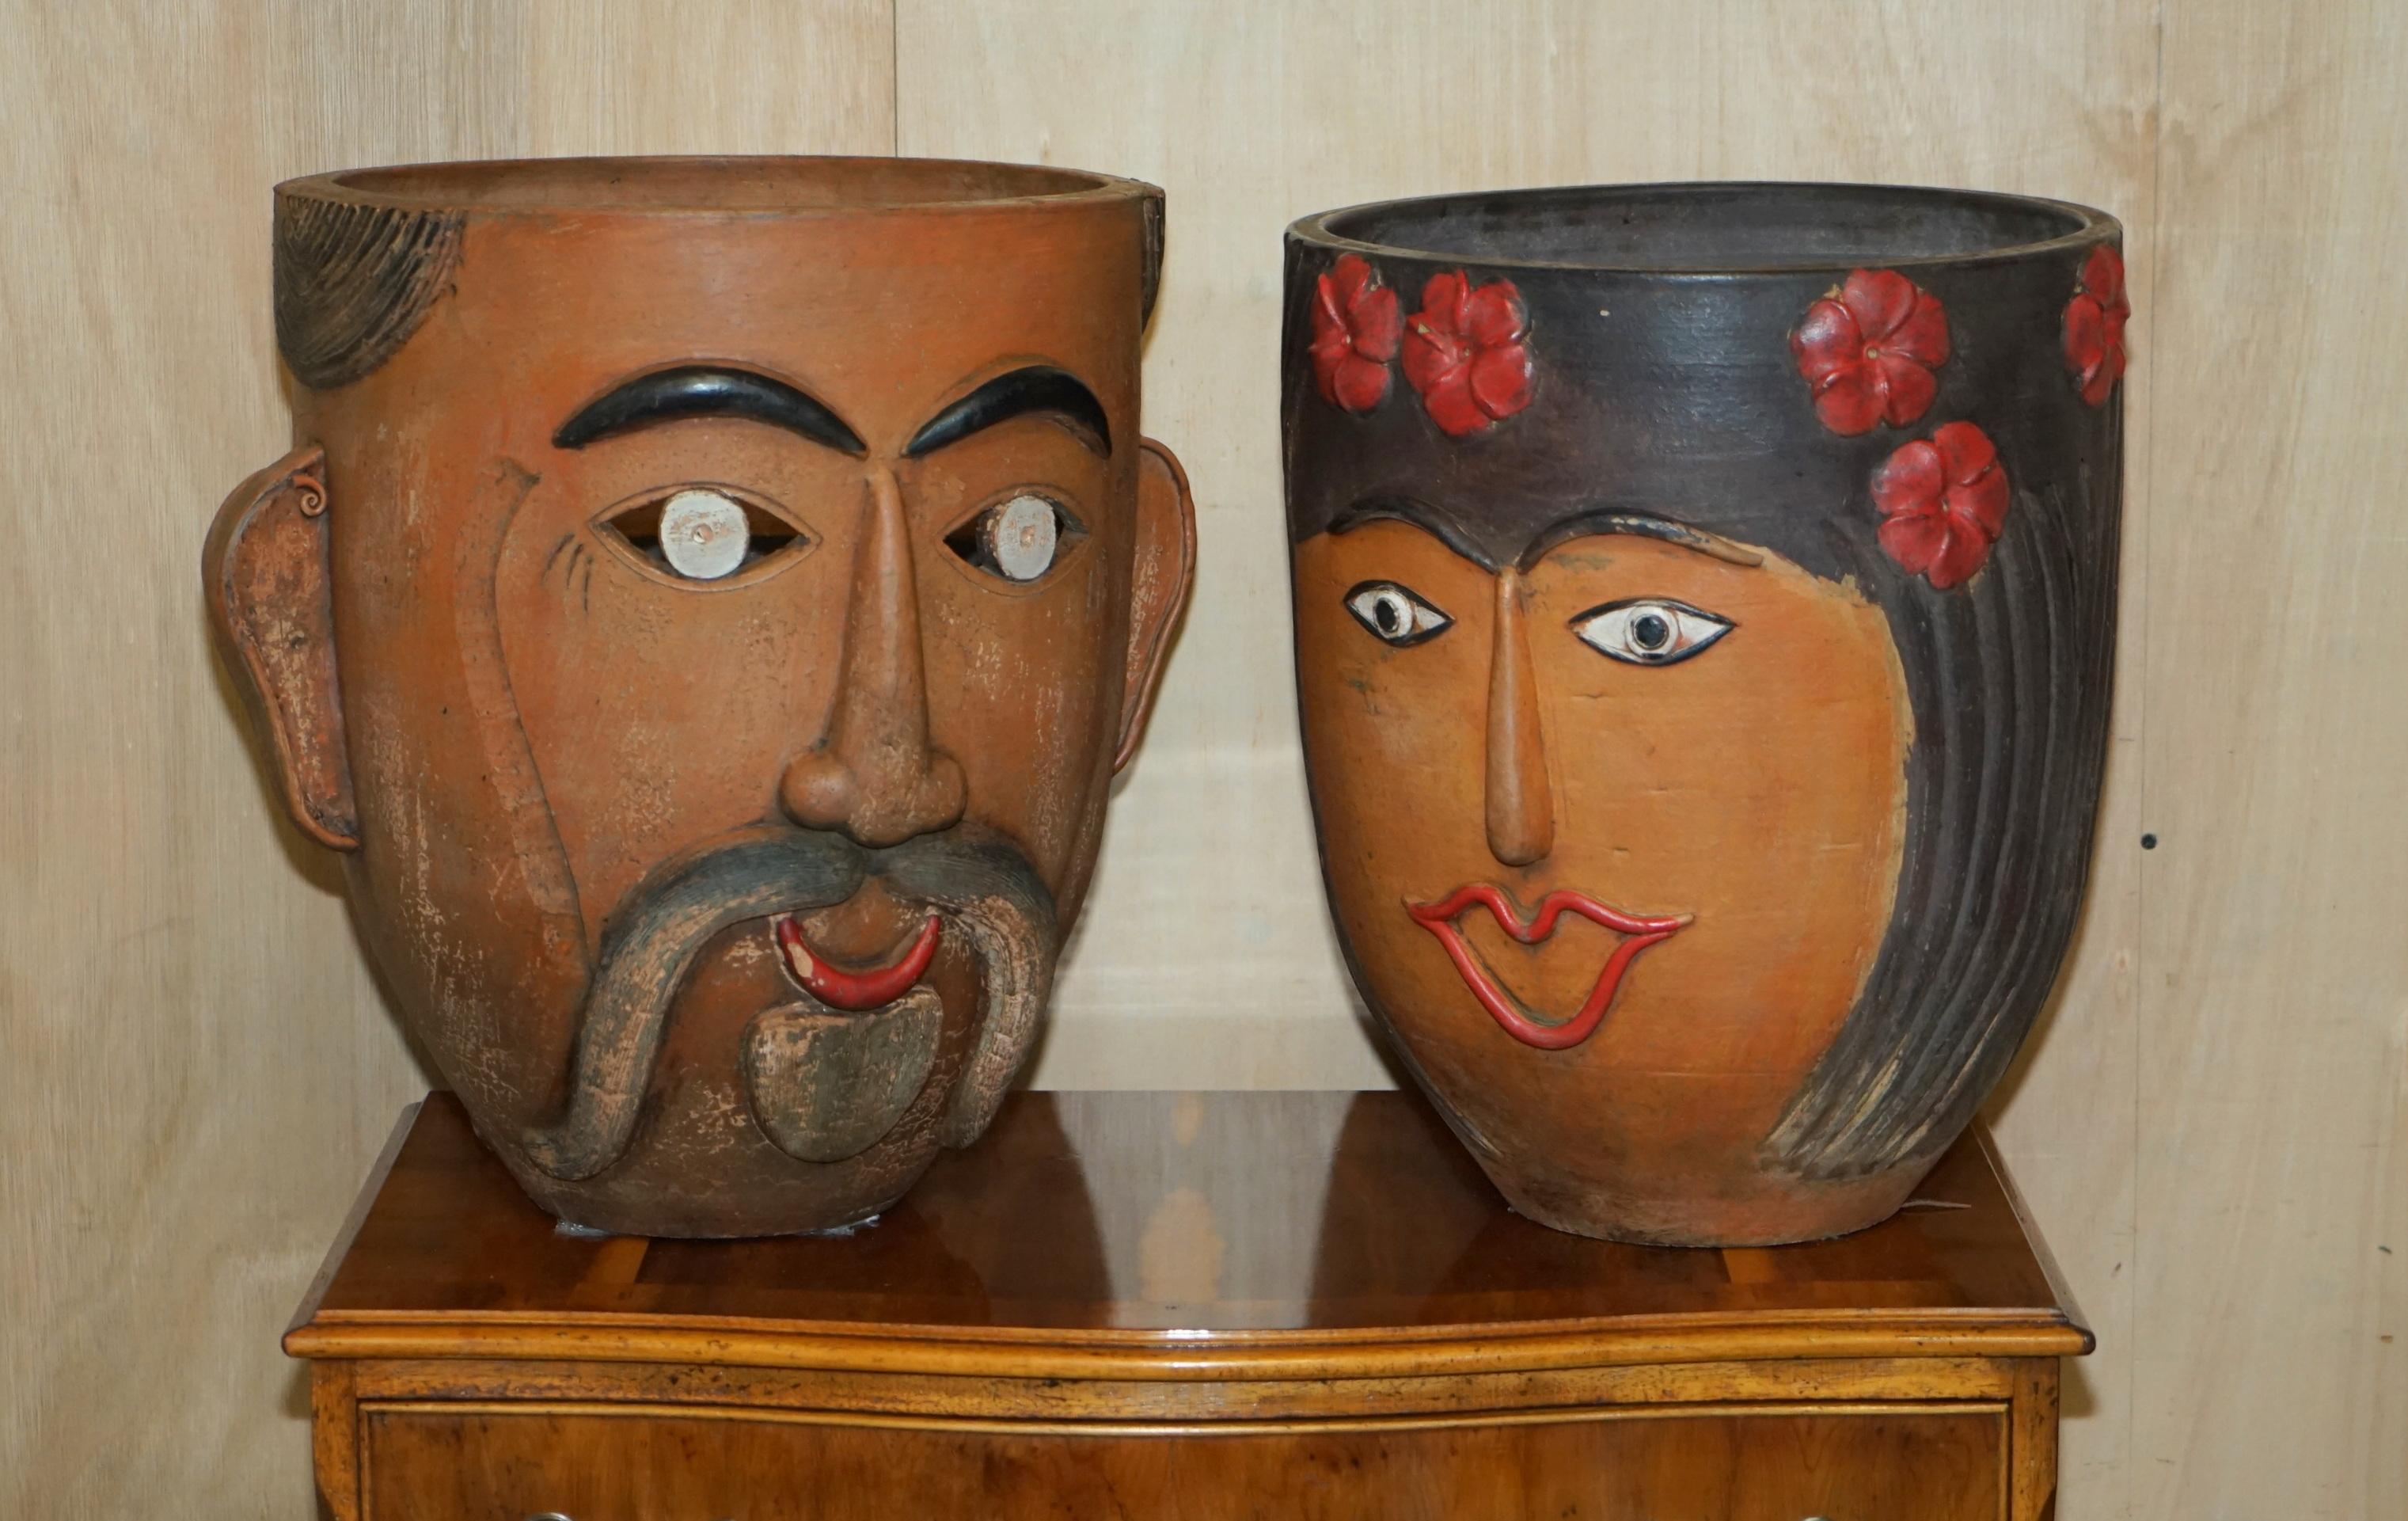 We are delighted to offer for sale this rare and collectable pair of Mexican circa 1960’s hand painted terracotta larger planter pots

A very good looking well made and decorative pair of Mexican folk art plant pots. They have the original painted